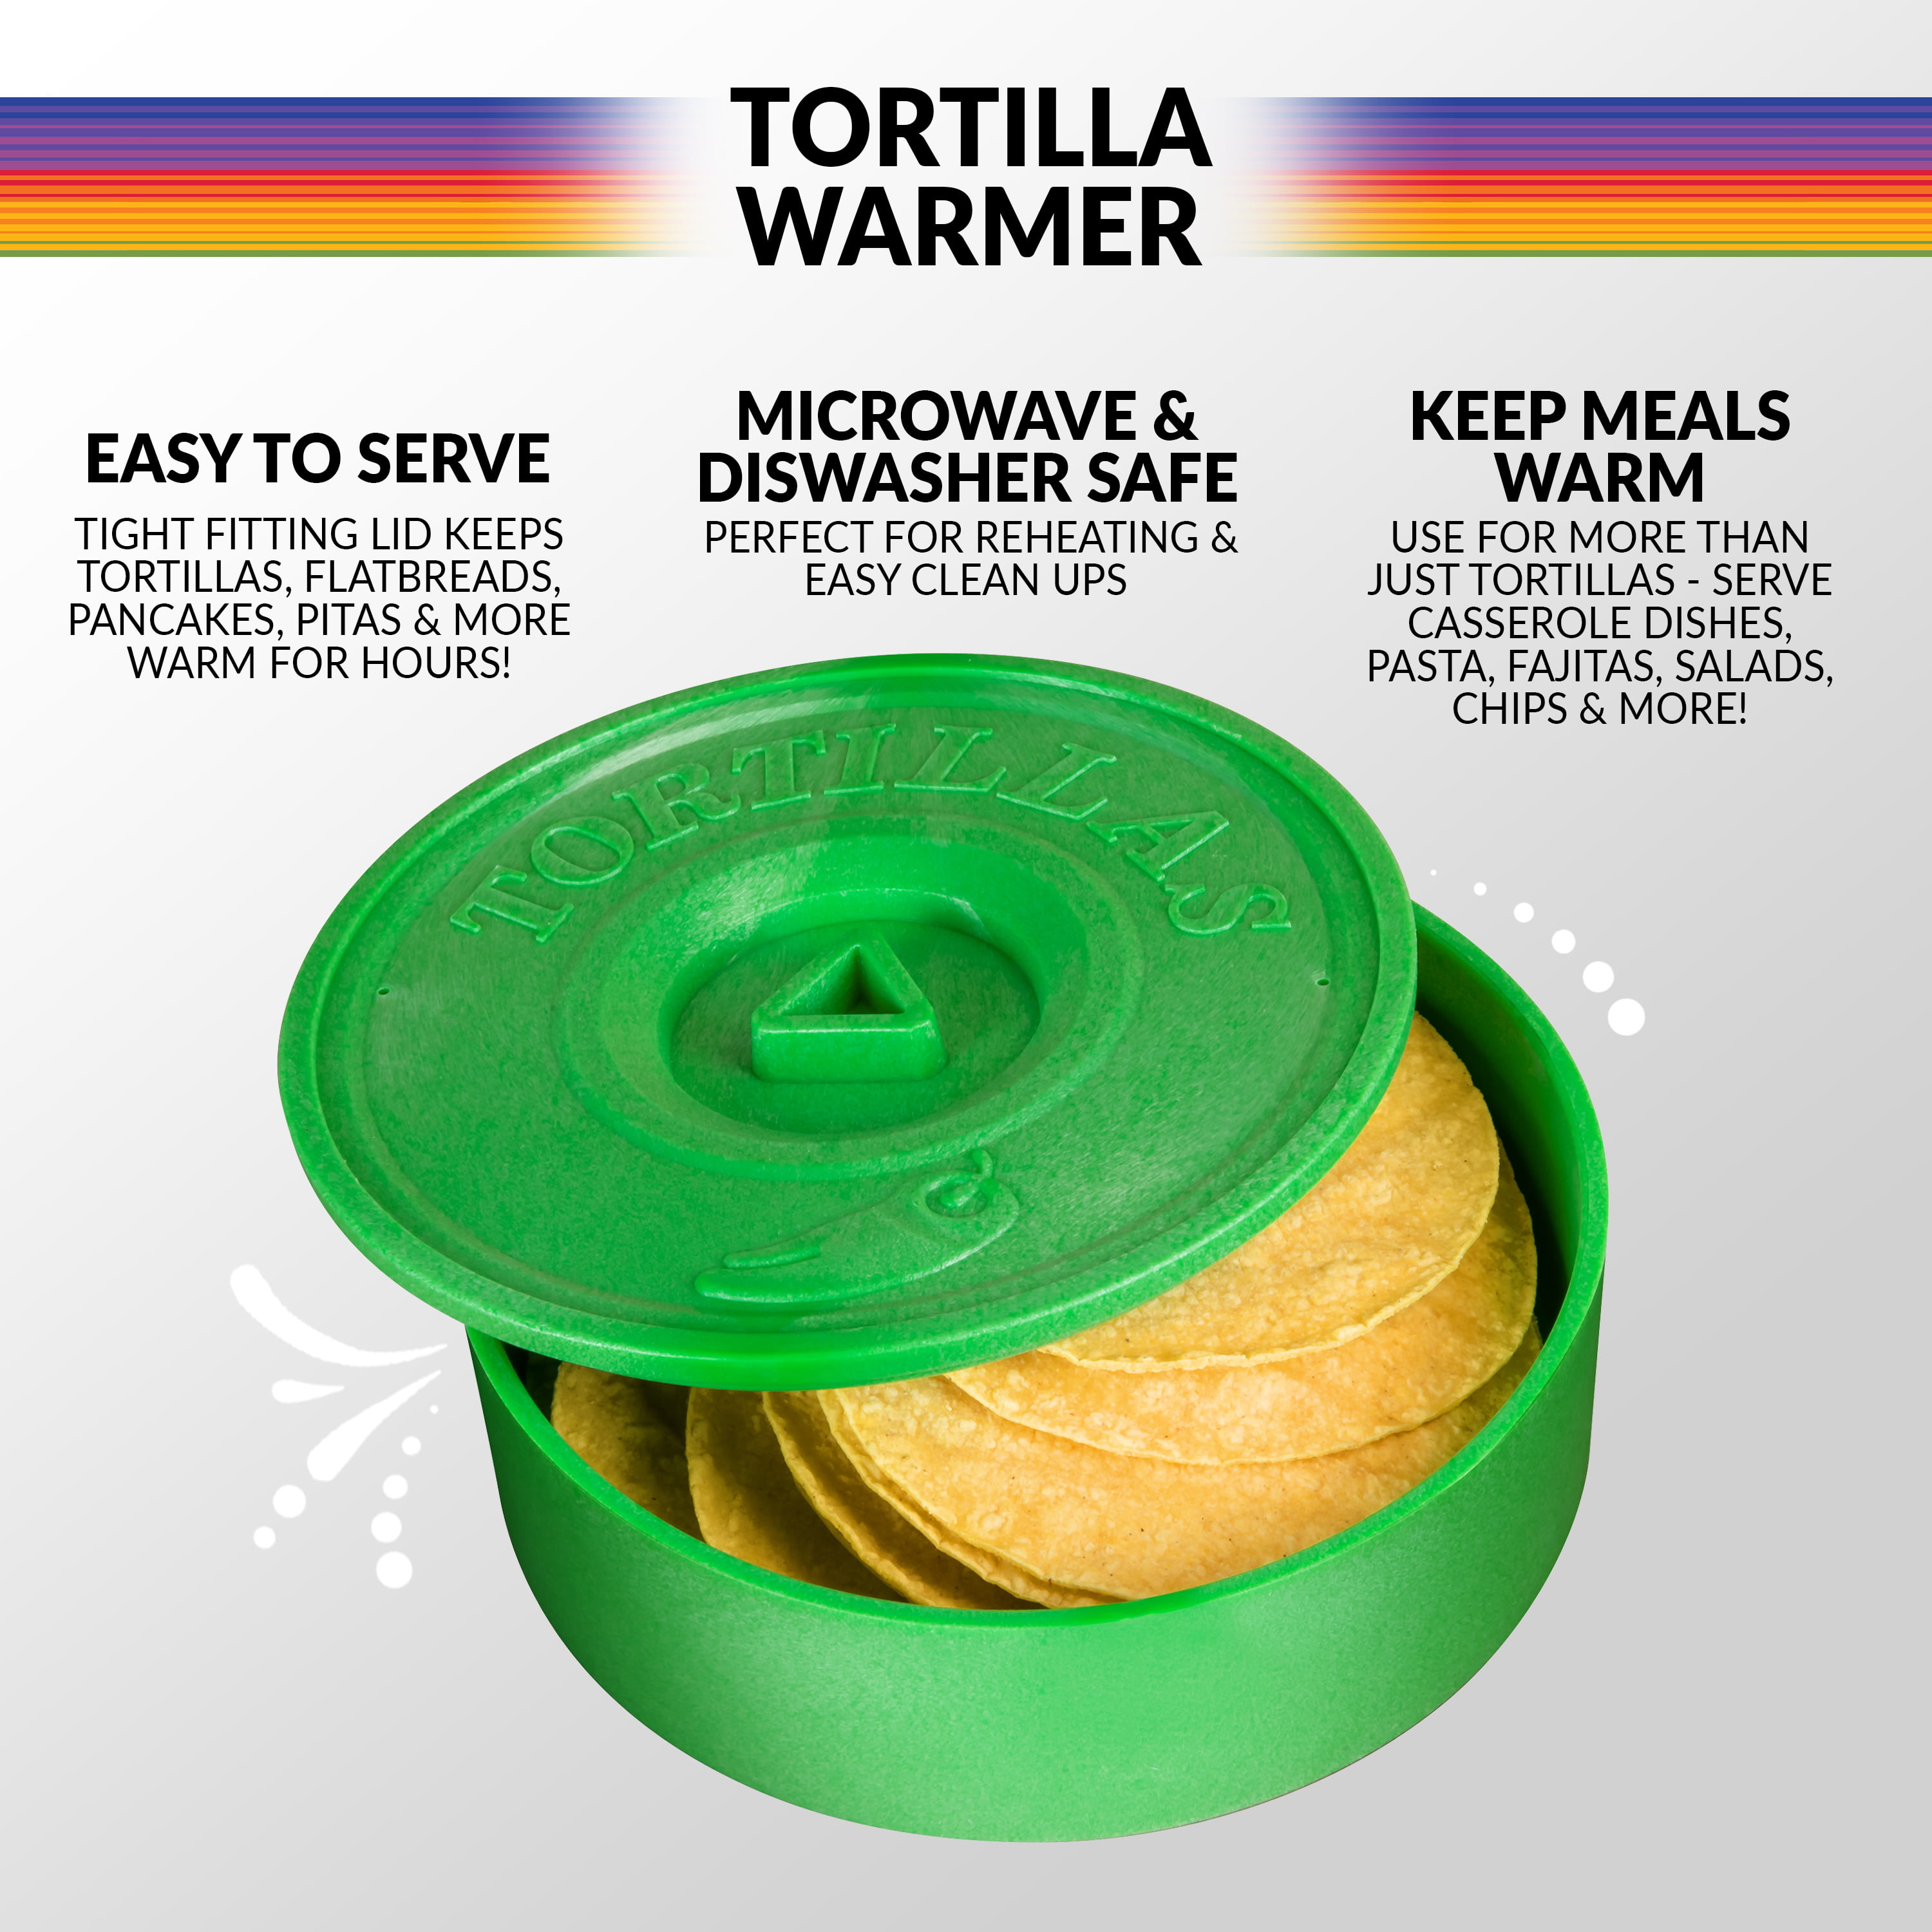 Tortilla Warmer for OEM/ ODM service - Trendware Products